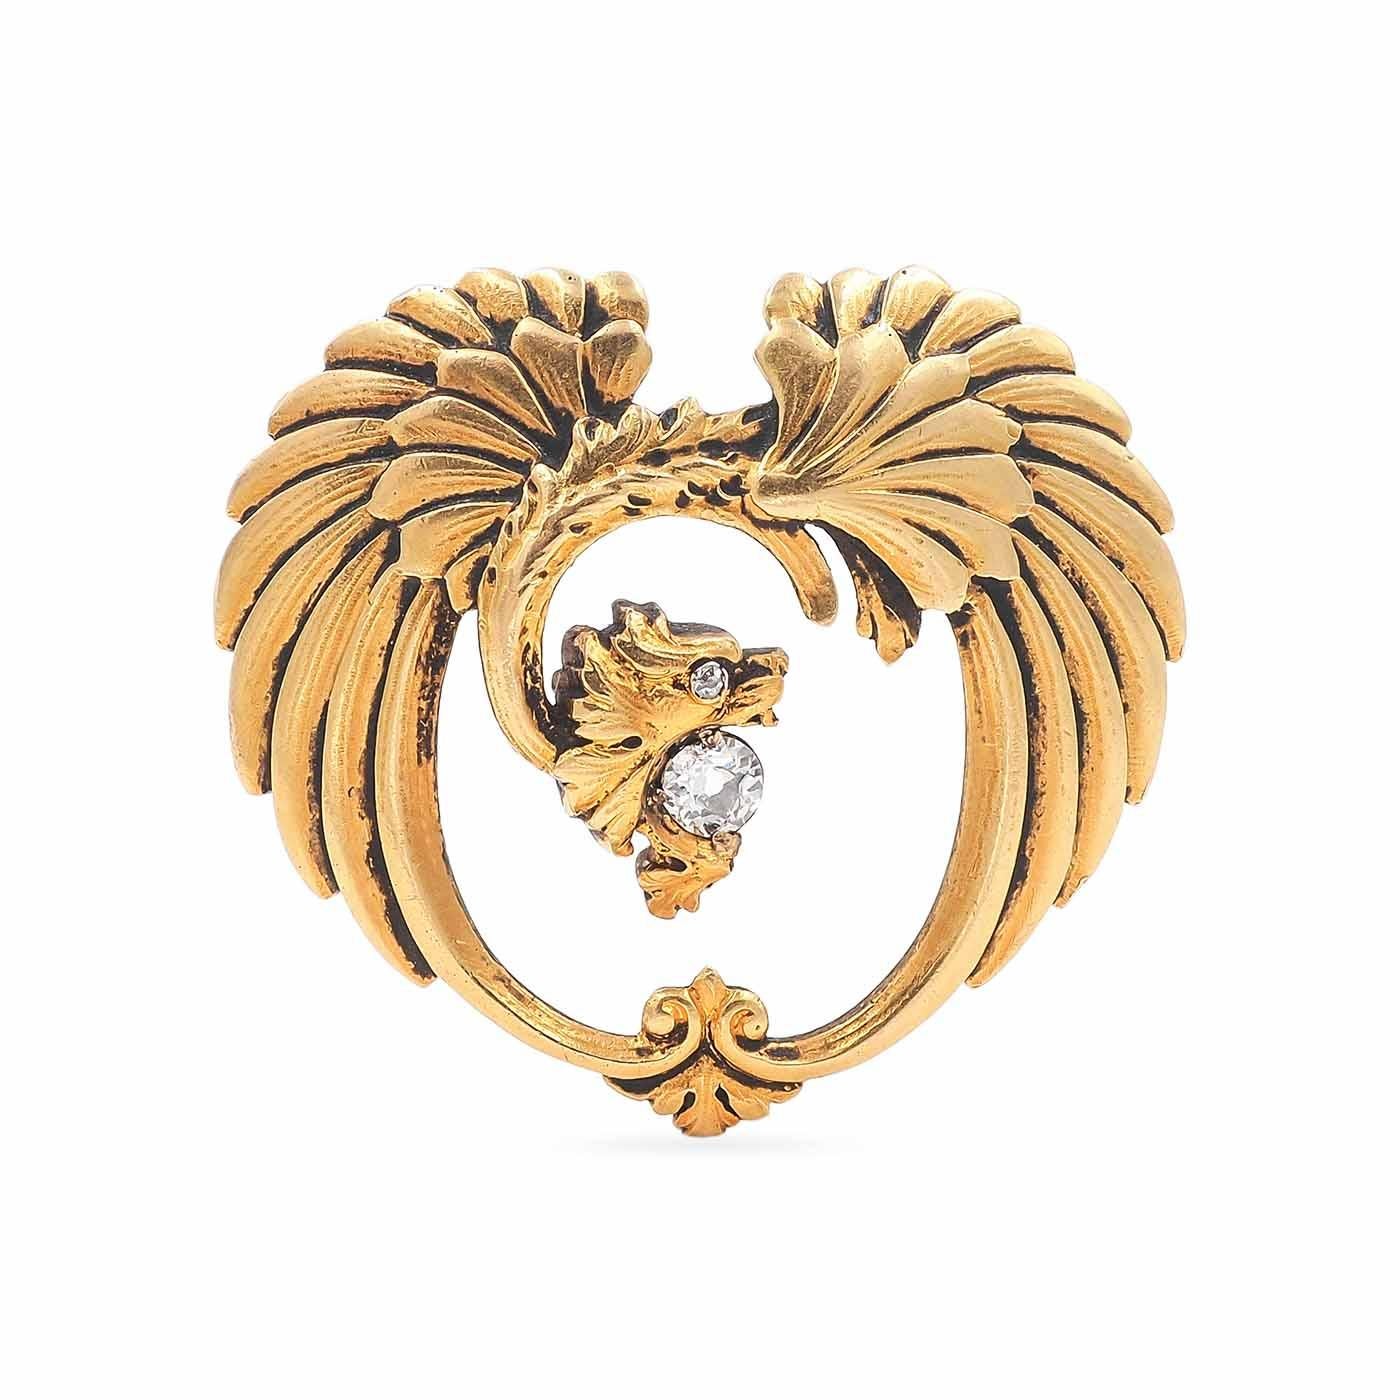 Art Nouveau era Dragon Pendant Necklace composed of 18k yellow gold. With an Old Mine Cut diamond in the dragon's mouth and one for its eye, for a total carat weight of 0.23 carats. Clasped on a contemporary 14k yellow gold chain that opens at both